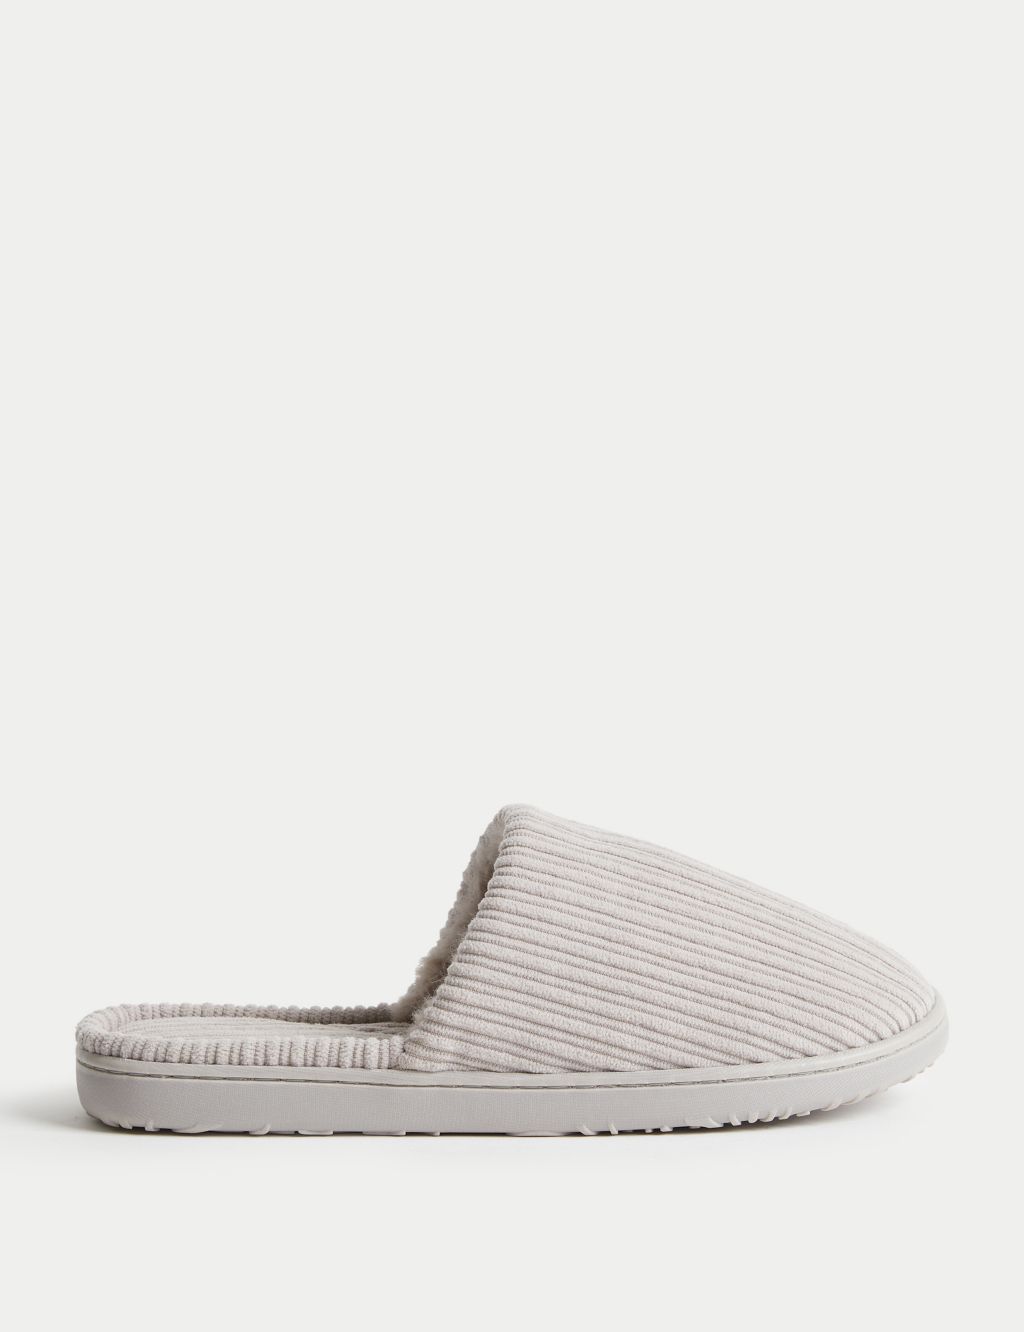 Faux Fur Lined Slippers with Secret Support | M&S Collection | M&S